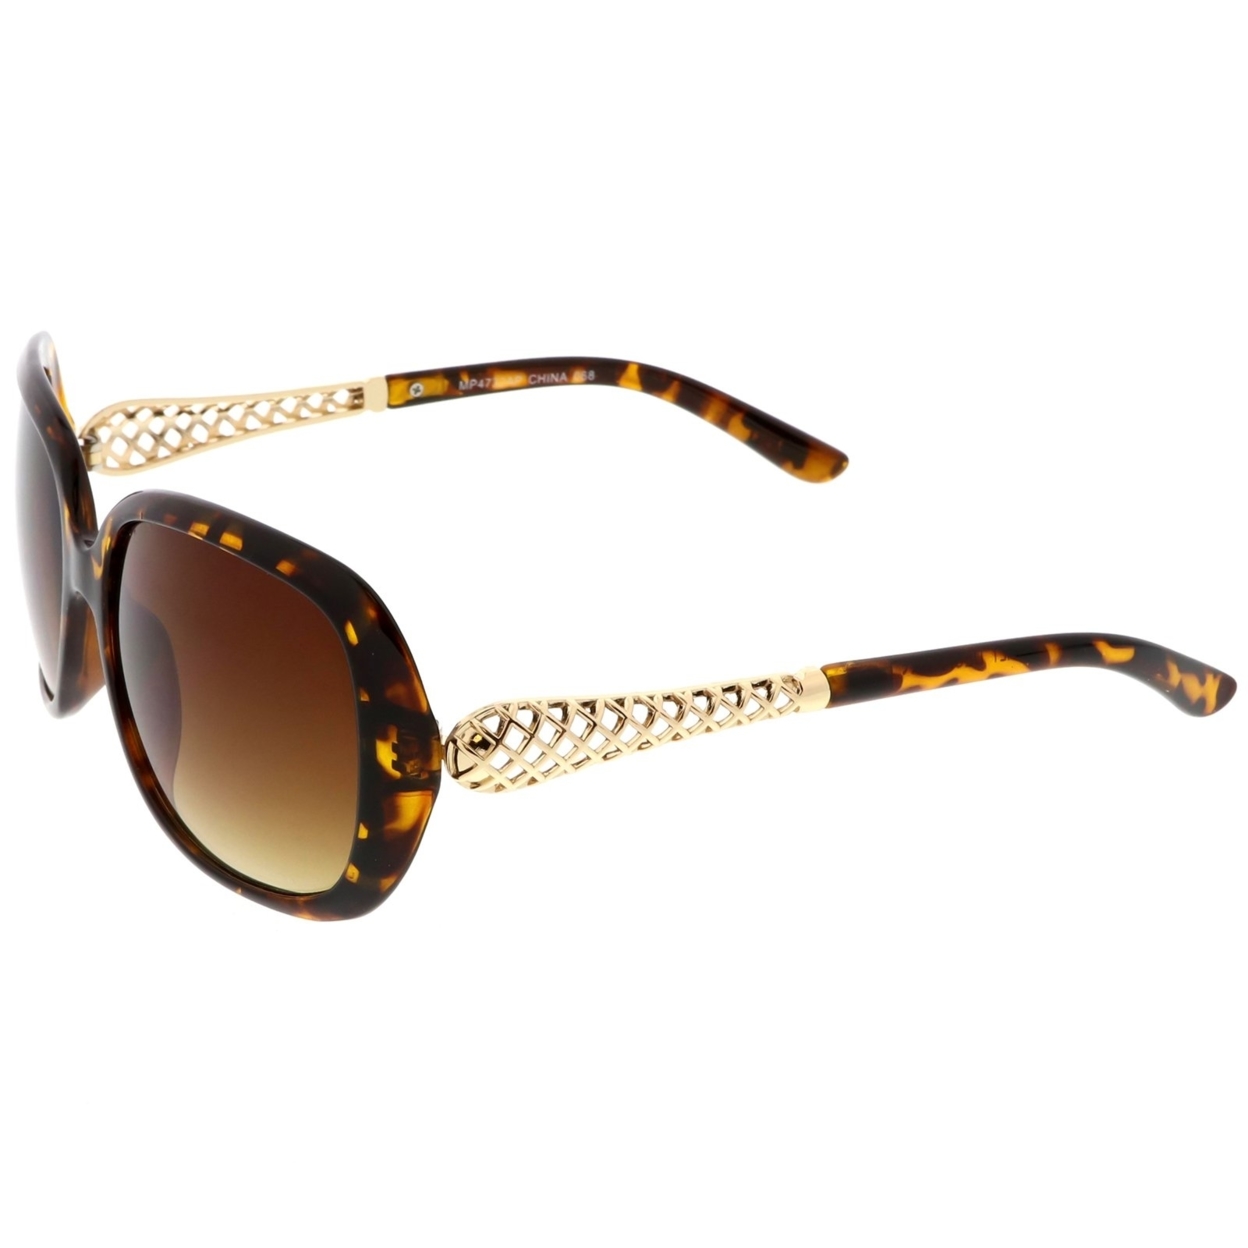 Women's Oversize Square Sunglasses With Metal Arm Accents Gradient Lens 59mm - Tortoise Gold / Amber